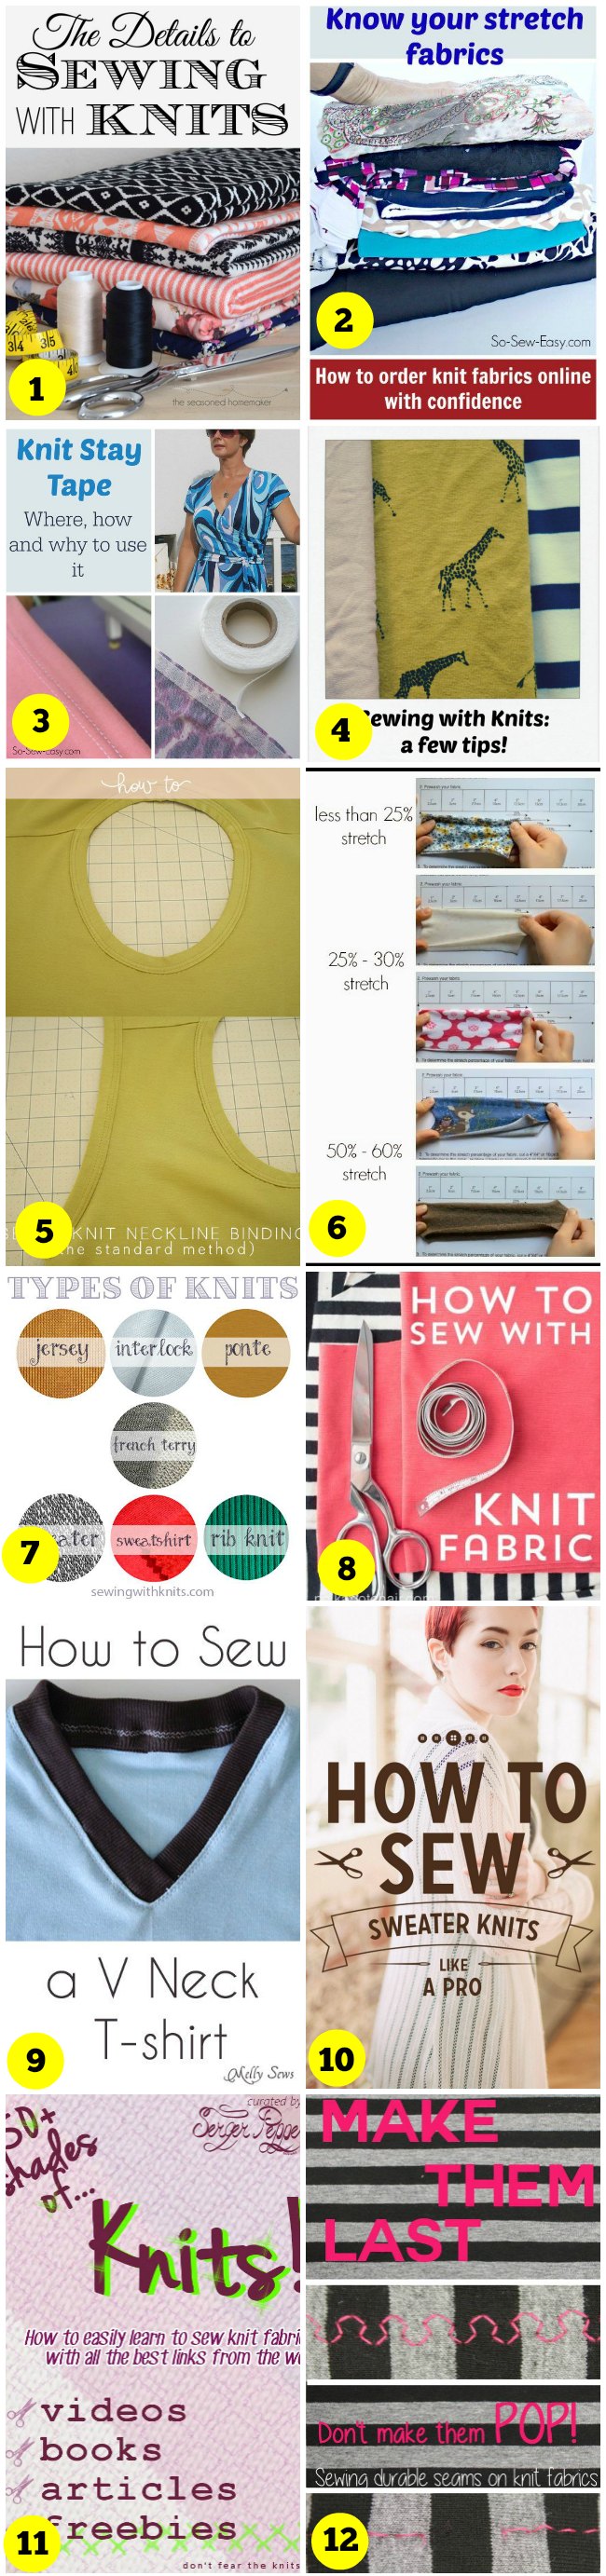 Collection of pins all on the subject of Working with Knits - follow this Pinterest board for all the best tips on working with stretch fabrics